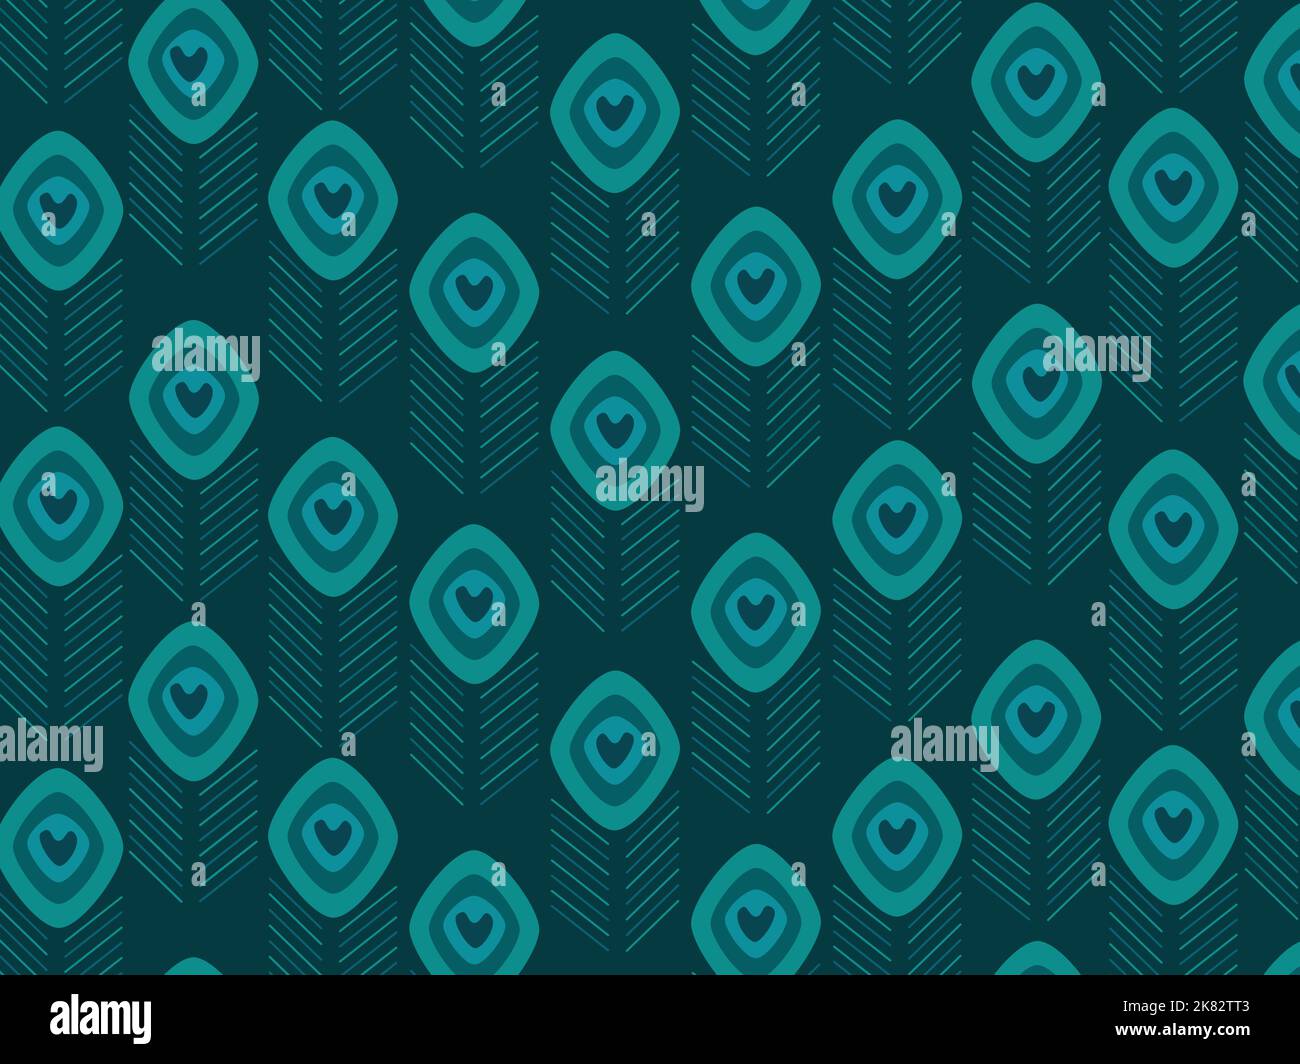 Peacock feathers abstract vector pattern in teal color palette Stock Vector